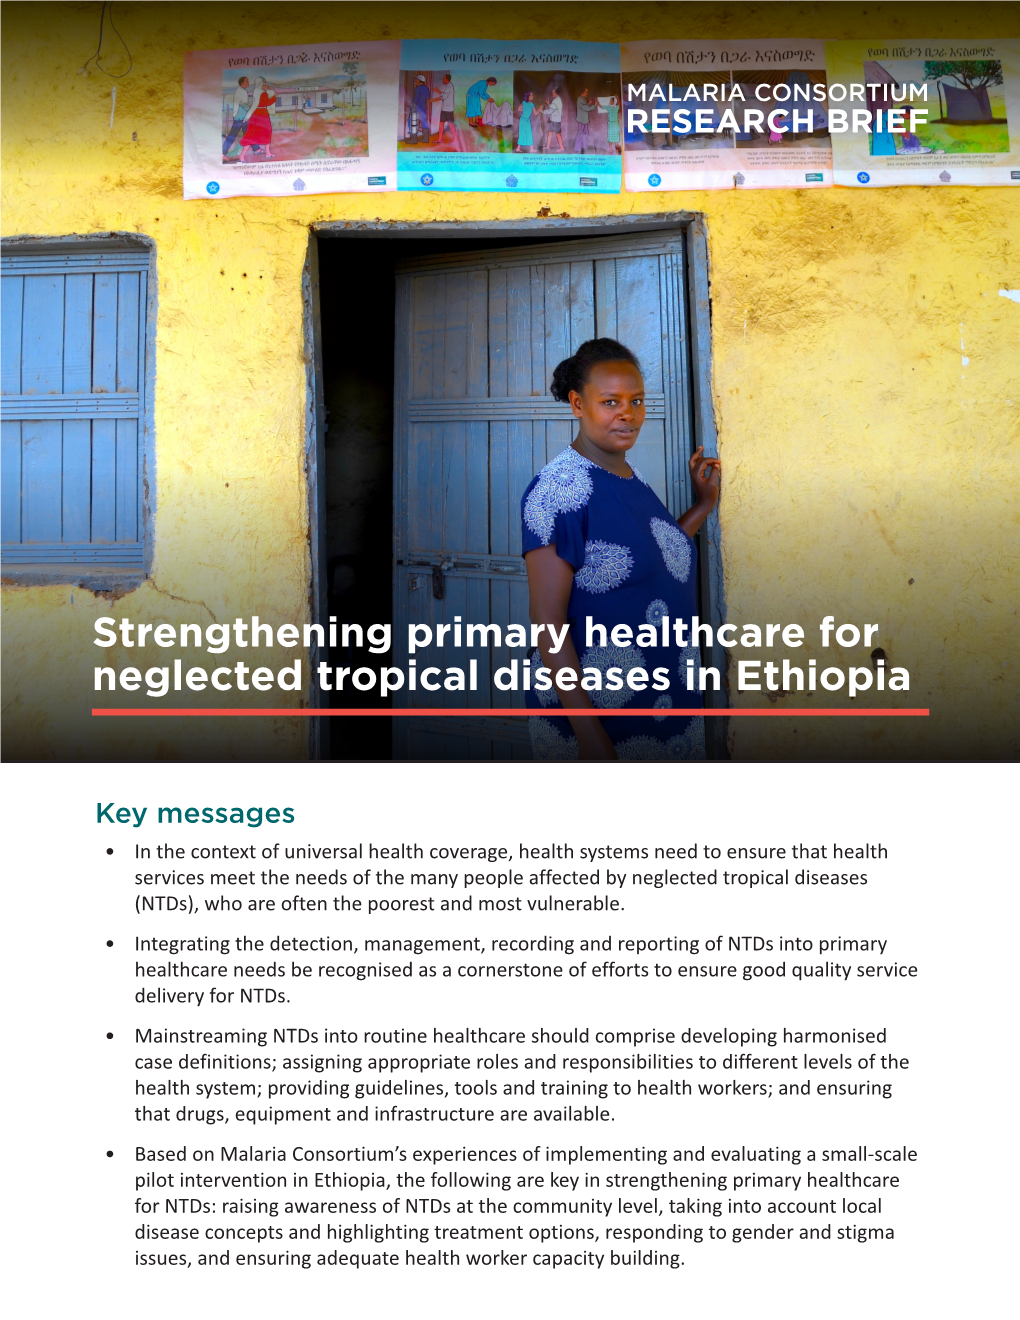 Strengthening Primary Healthcare for Neglected Tropical Diseases in Ethiopia